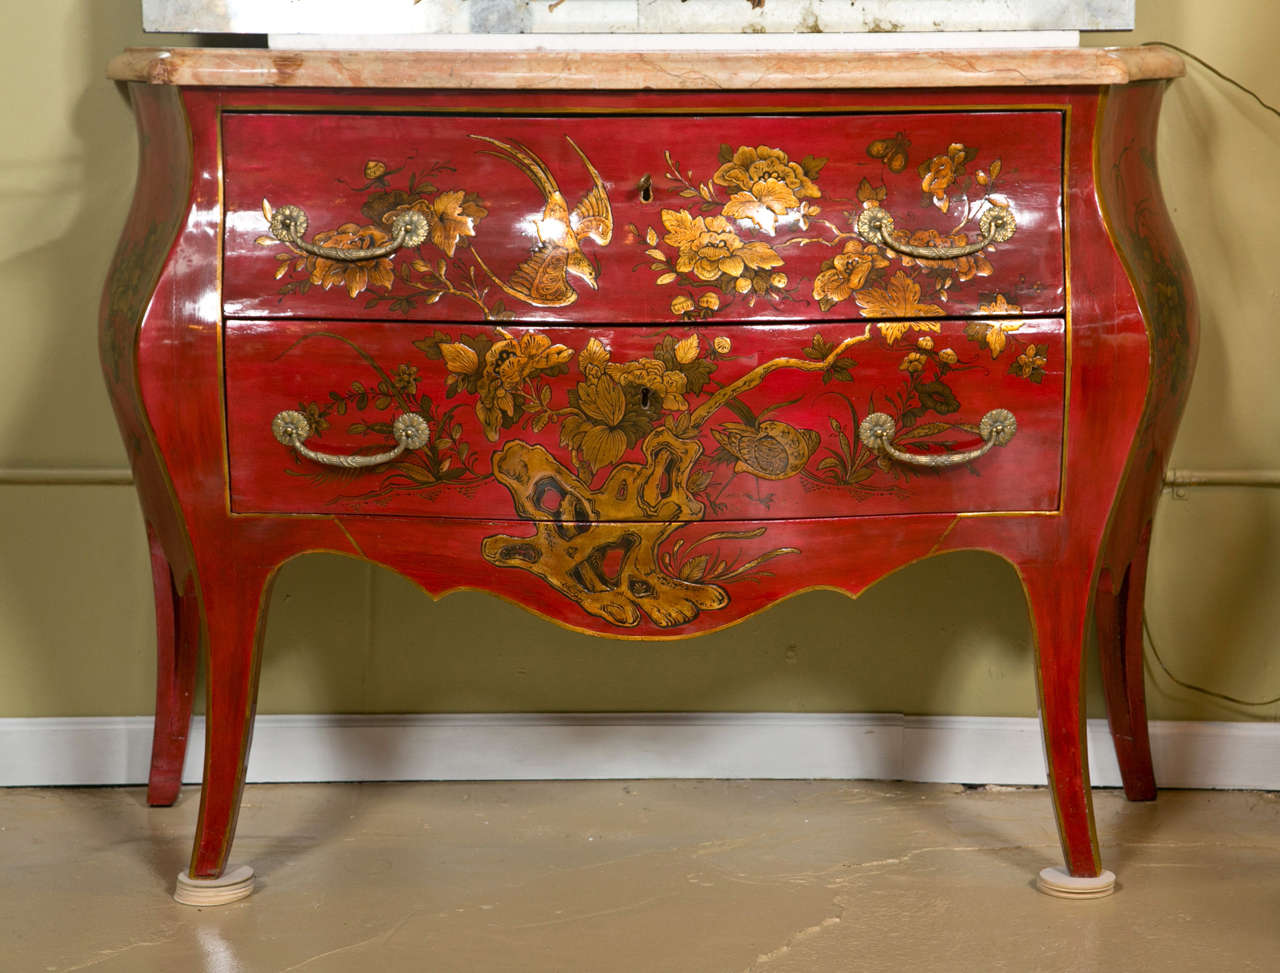 Fine and rare pair of turn of the century French chinoiserie style commodes, each having a beveled serpentine marble top, over a red-lacquered conforming case decorated with gilded chinosierie painted scene, supported on splayed legs. This Fine pair